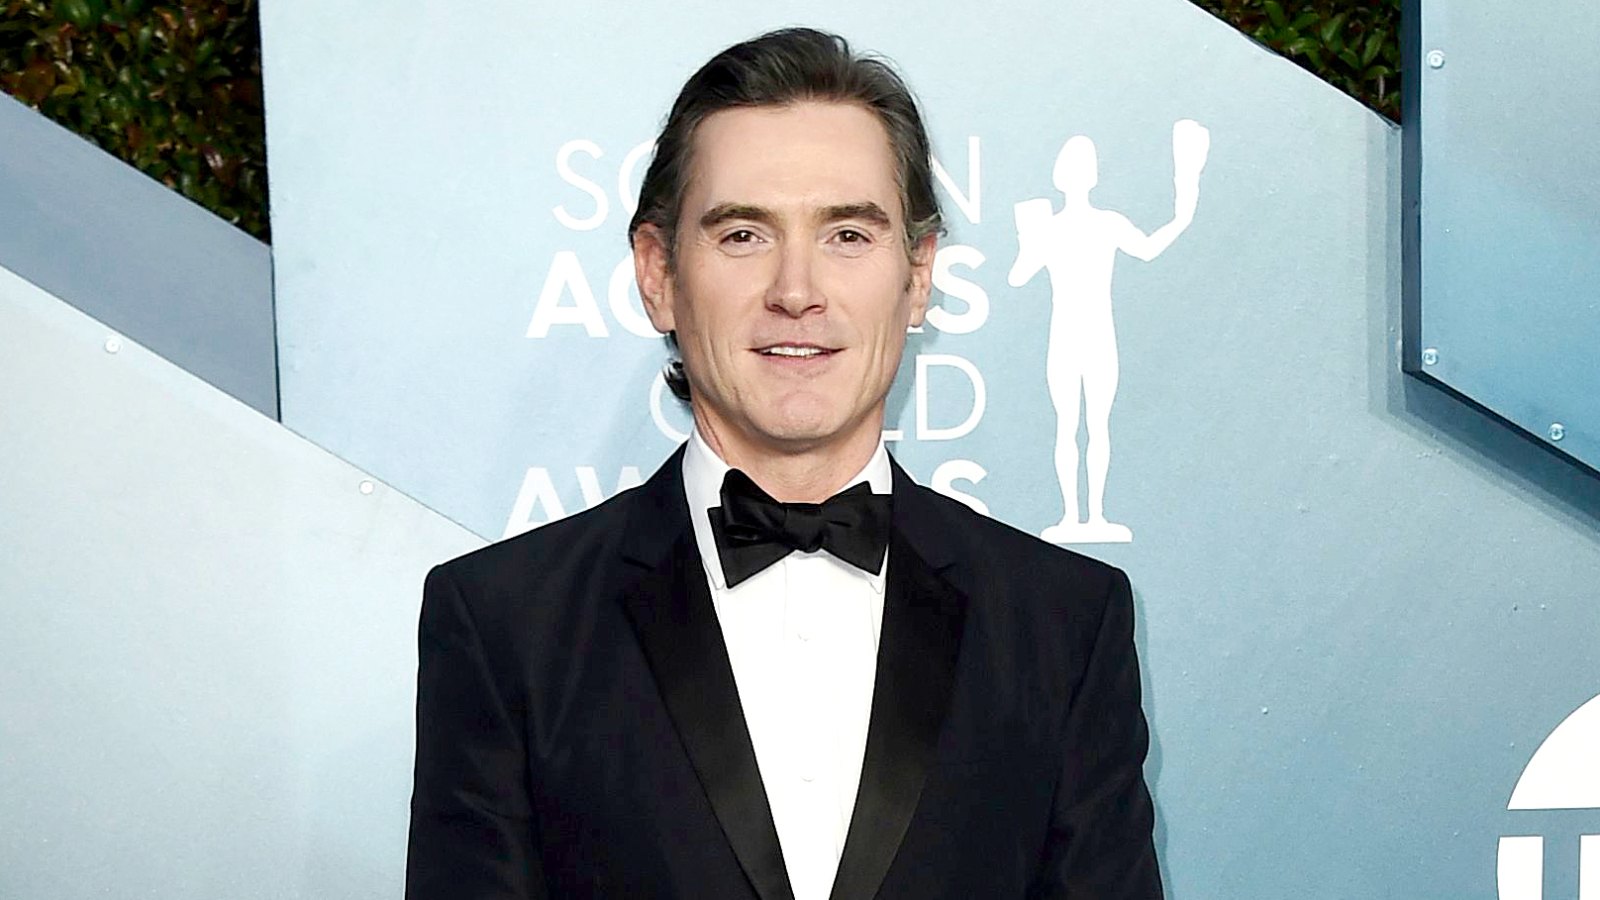 Billy-Crudup-Reveals-He-and-Ex-Mary-Louise-Parker-Starred-in-Son-William’s-Student-Film